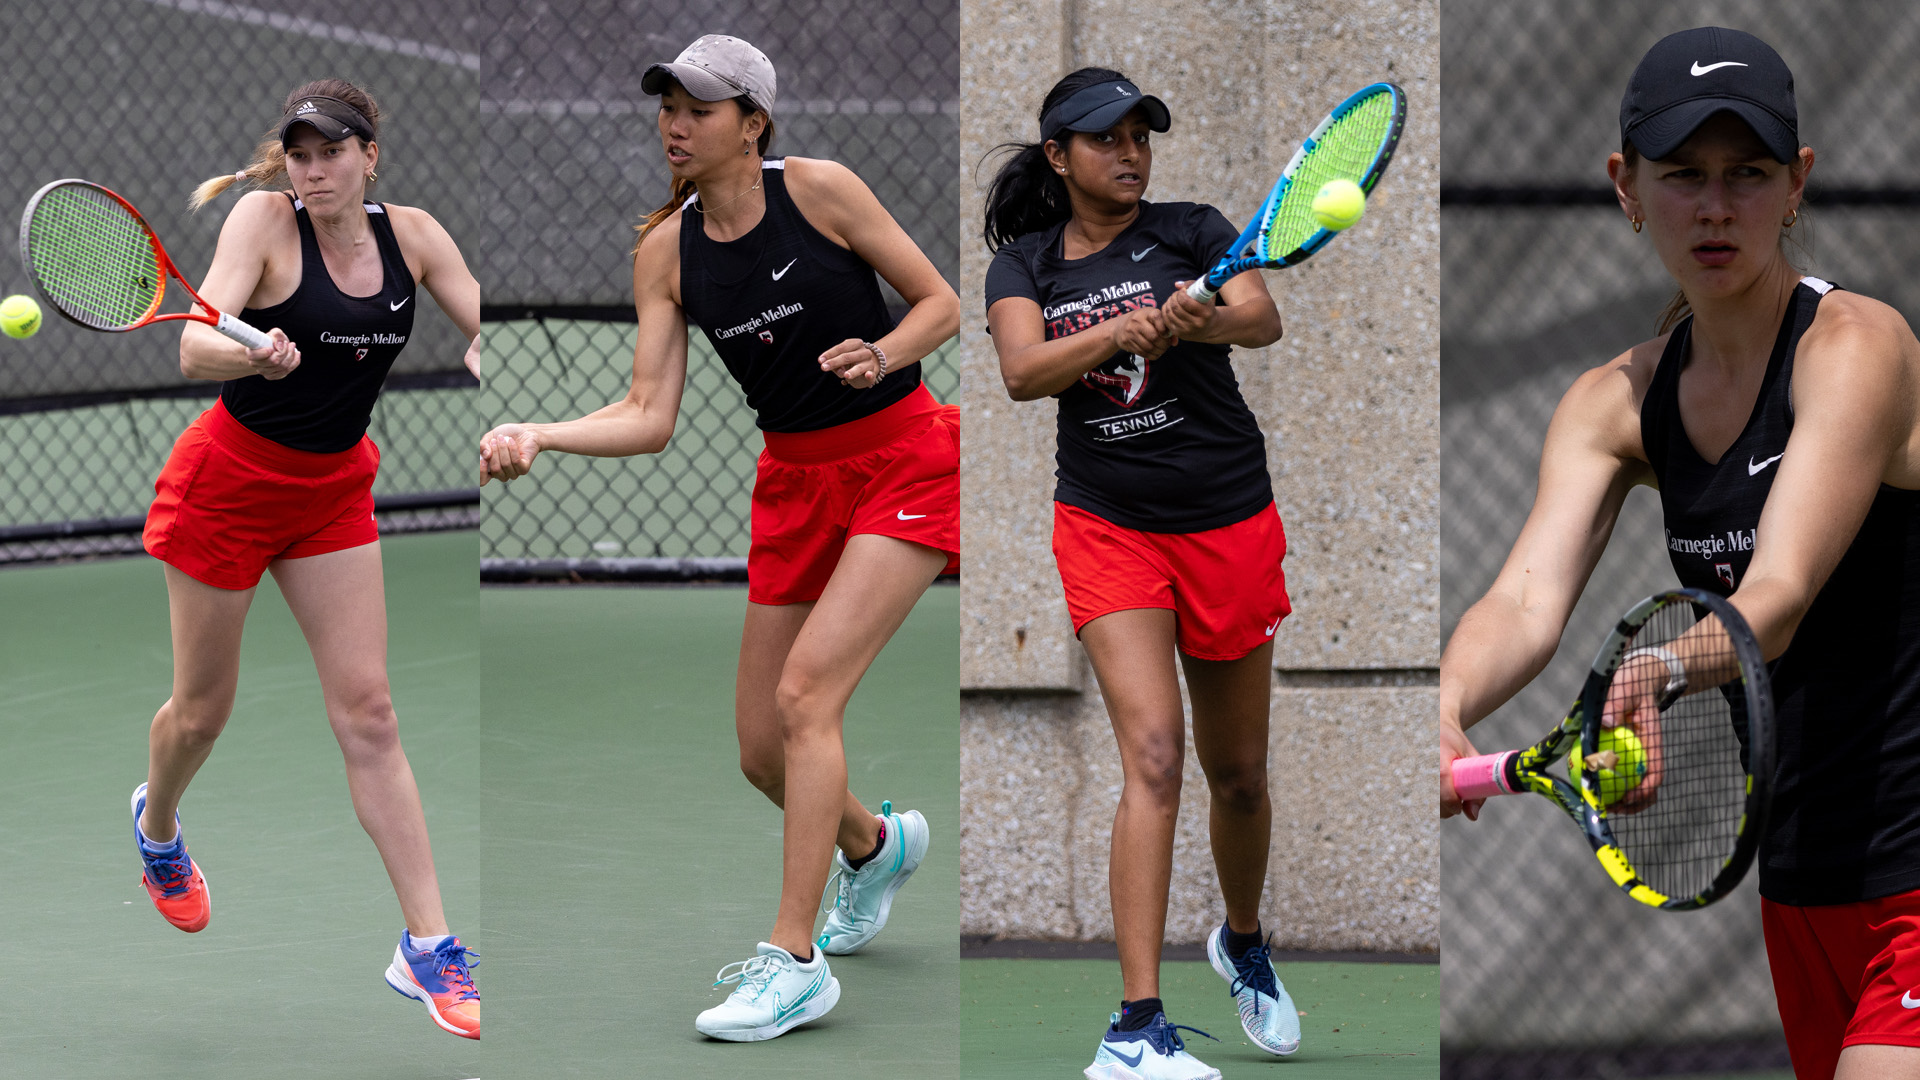 collage of four women's tennis players swinging racquets